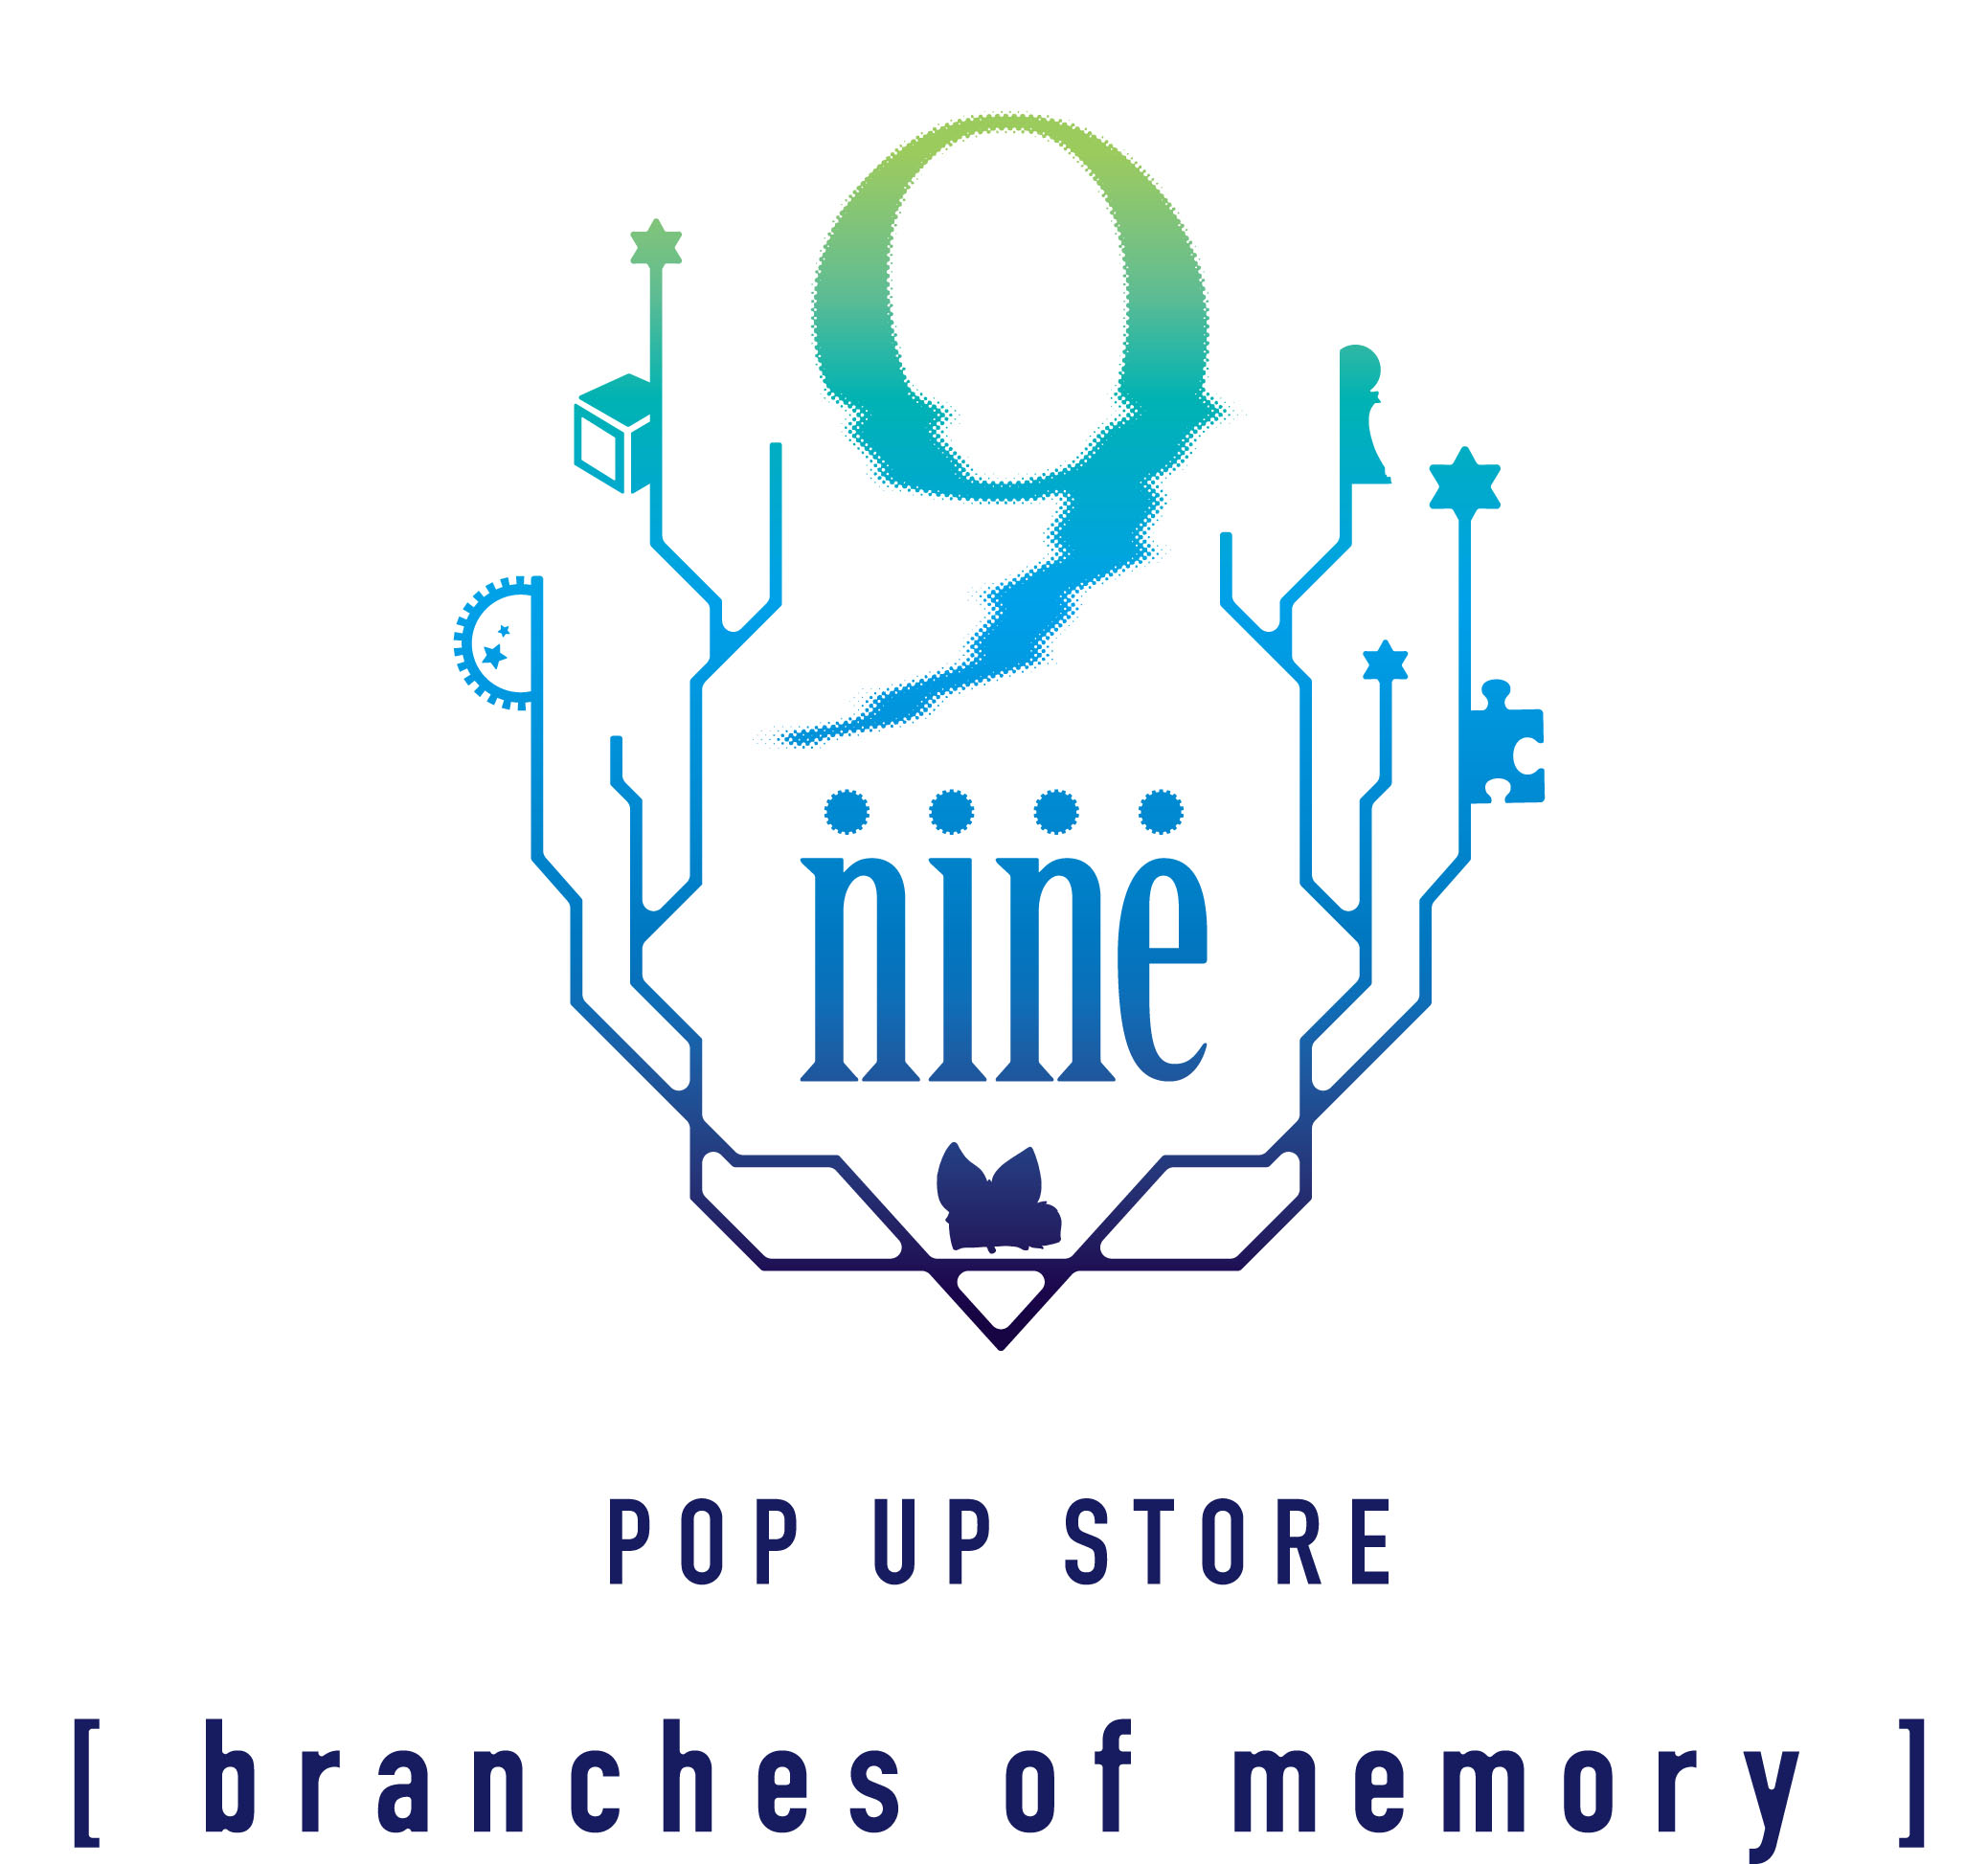 9-nine- POP UP STORE【branches of memory】